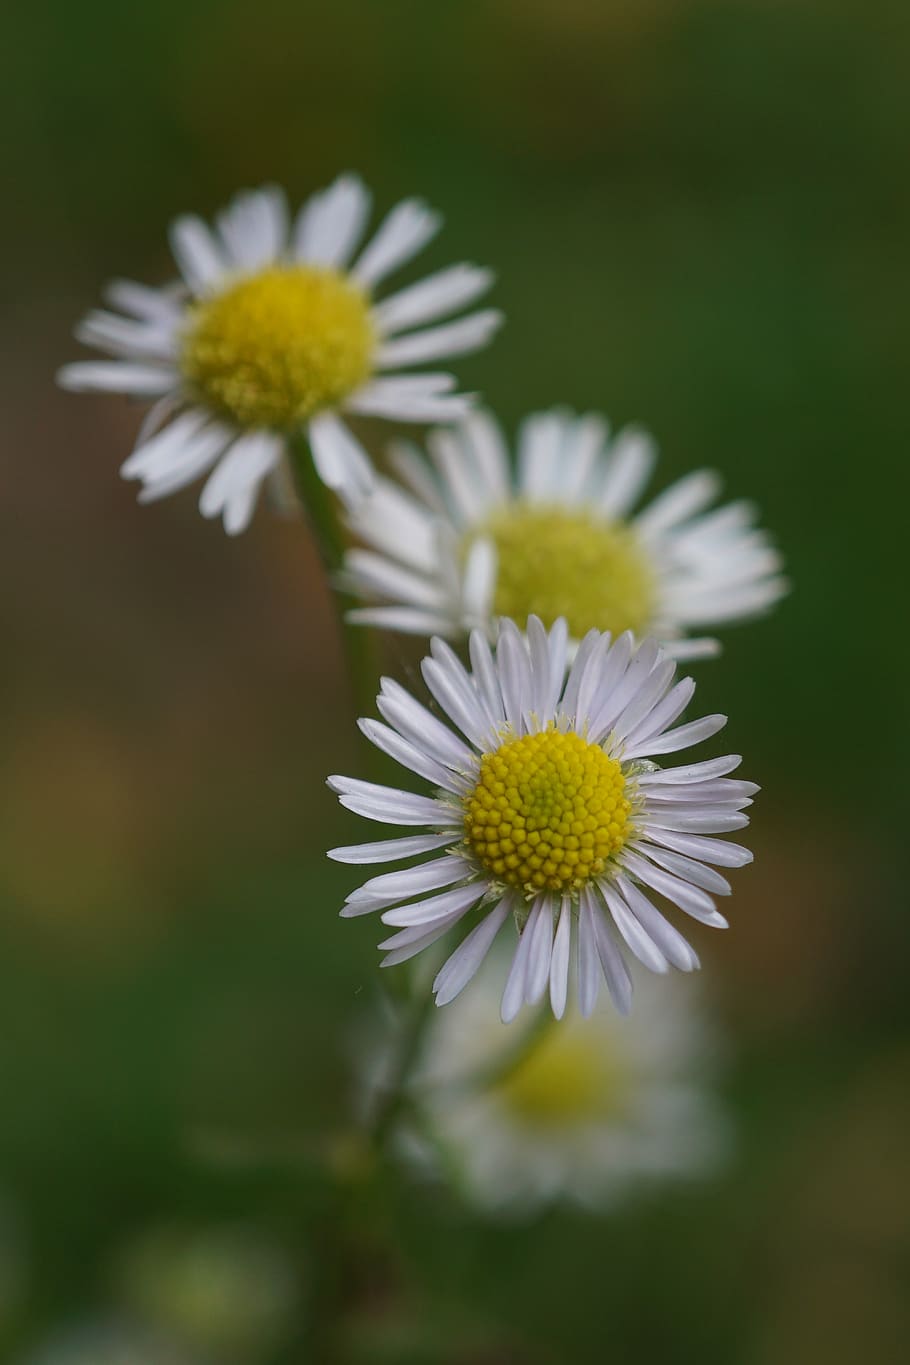 chamomile, chamomile flower, nature, naturopathy, medicinal herb, medicinal plant, wild herbs, chamomile blossoms, plant, bloom